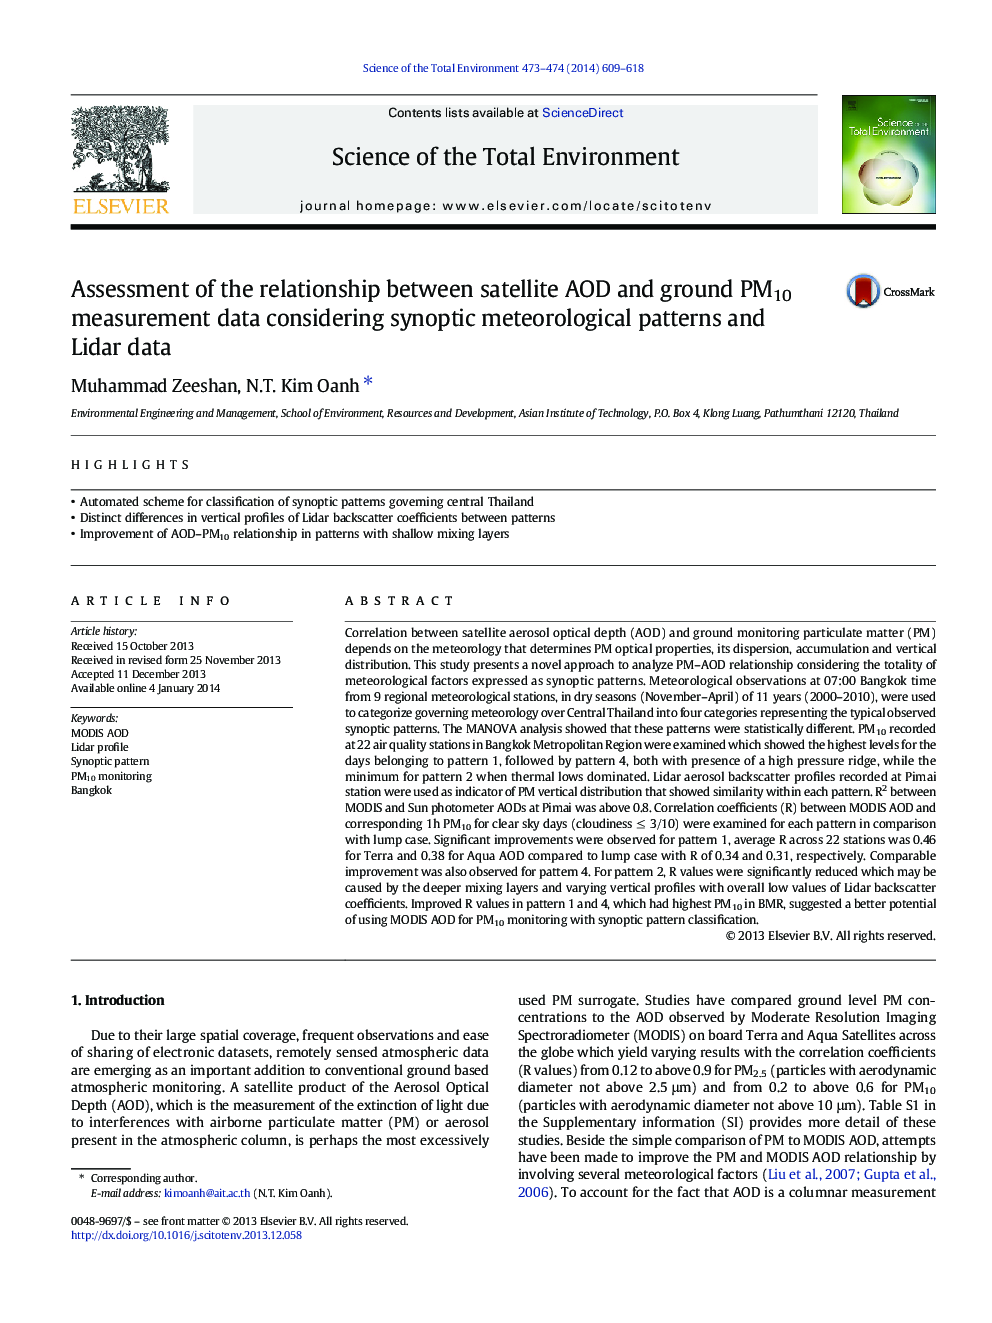 Assessment of the relationship between satellite AOD and ground PM10 measurement data considering synoptic meteorological patterns and Lidar data